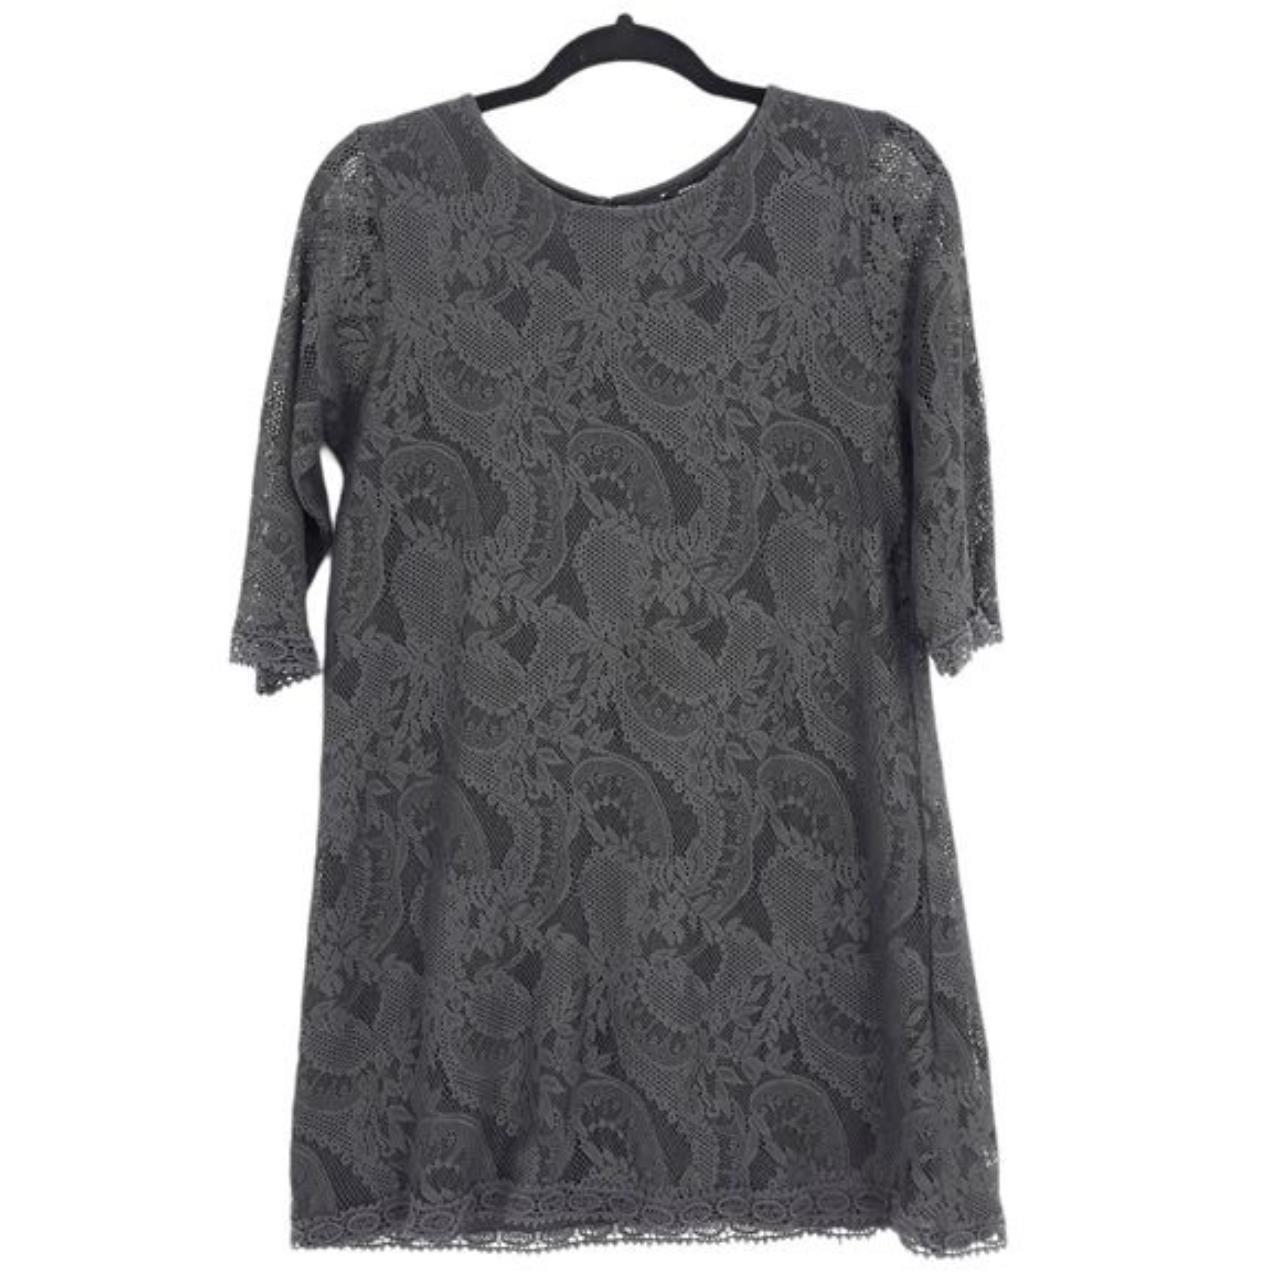 Product Image 1 - Cotton charcoal gray paisley lace